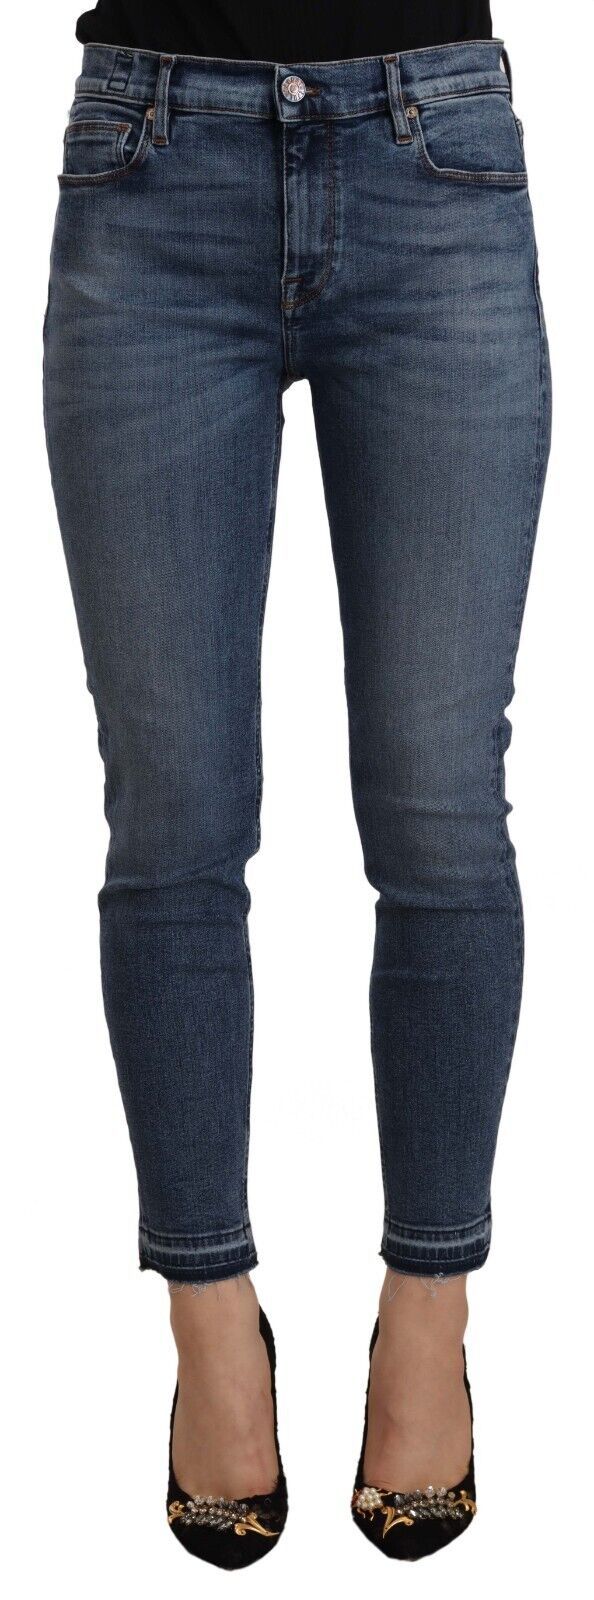 Don The Fuller Chic Slim Fit Blue Washed Women's Jeans